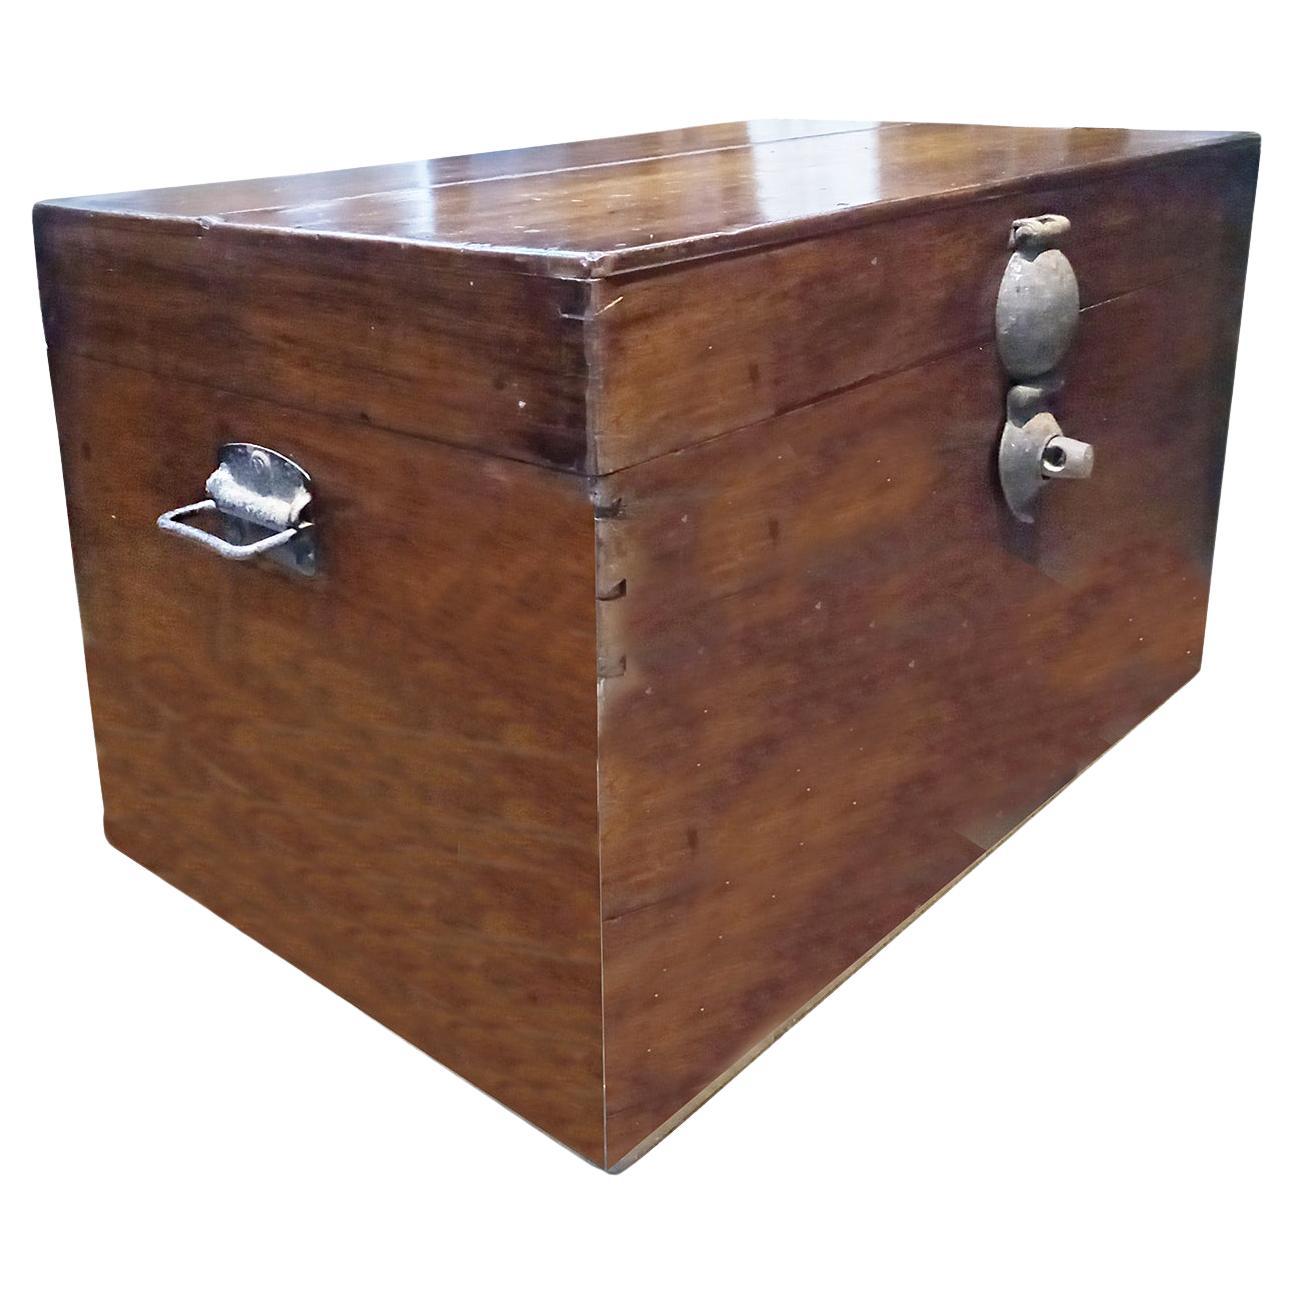 An early 20th Century Teak and Cedar trunk, hand-crafted in Borneo, Indonesia. 

The outside of the trunk is finished in caramel brown, with original metal handles on the sides and also its original metal lock. The inside is raw, unfinished cedar,